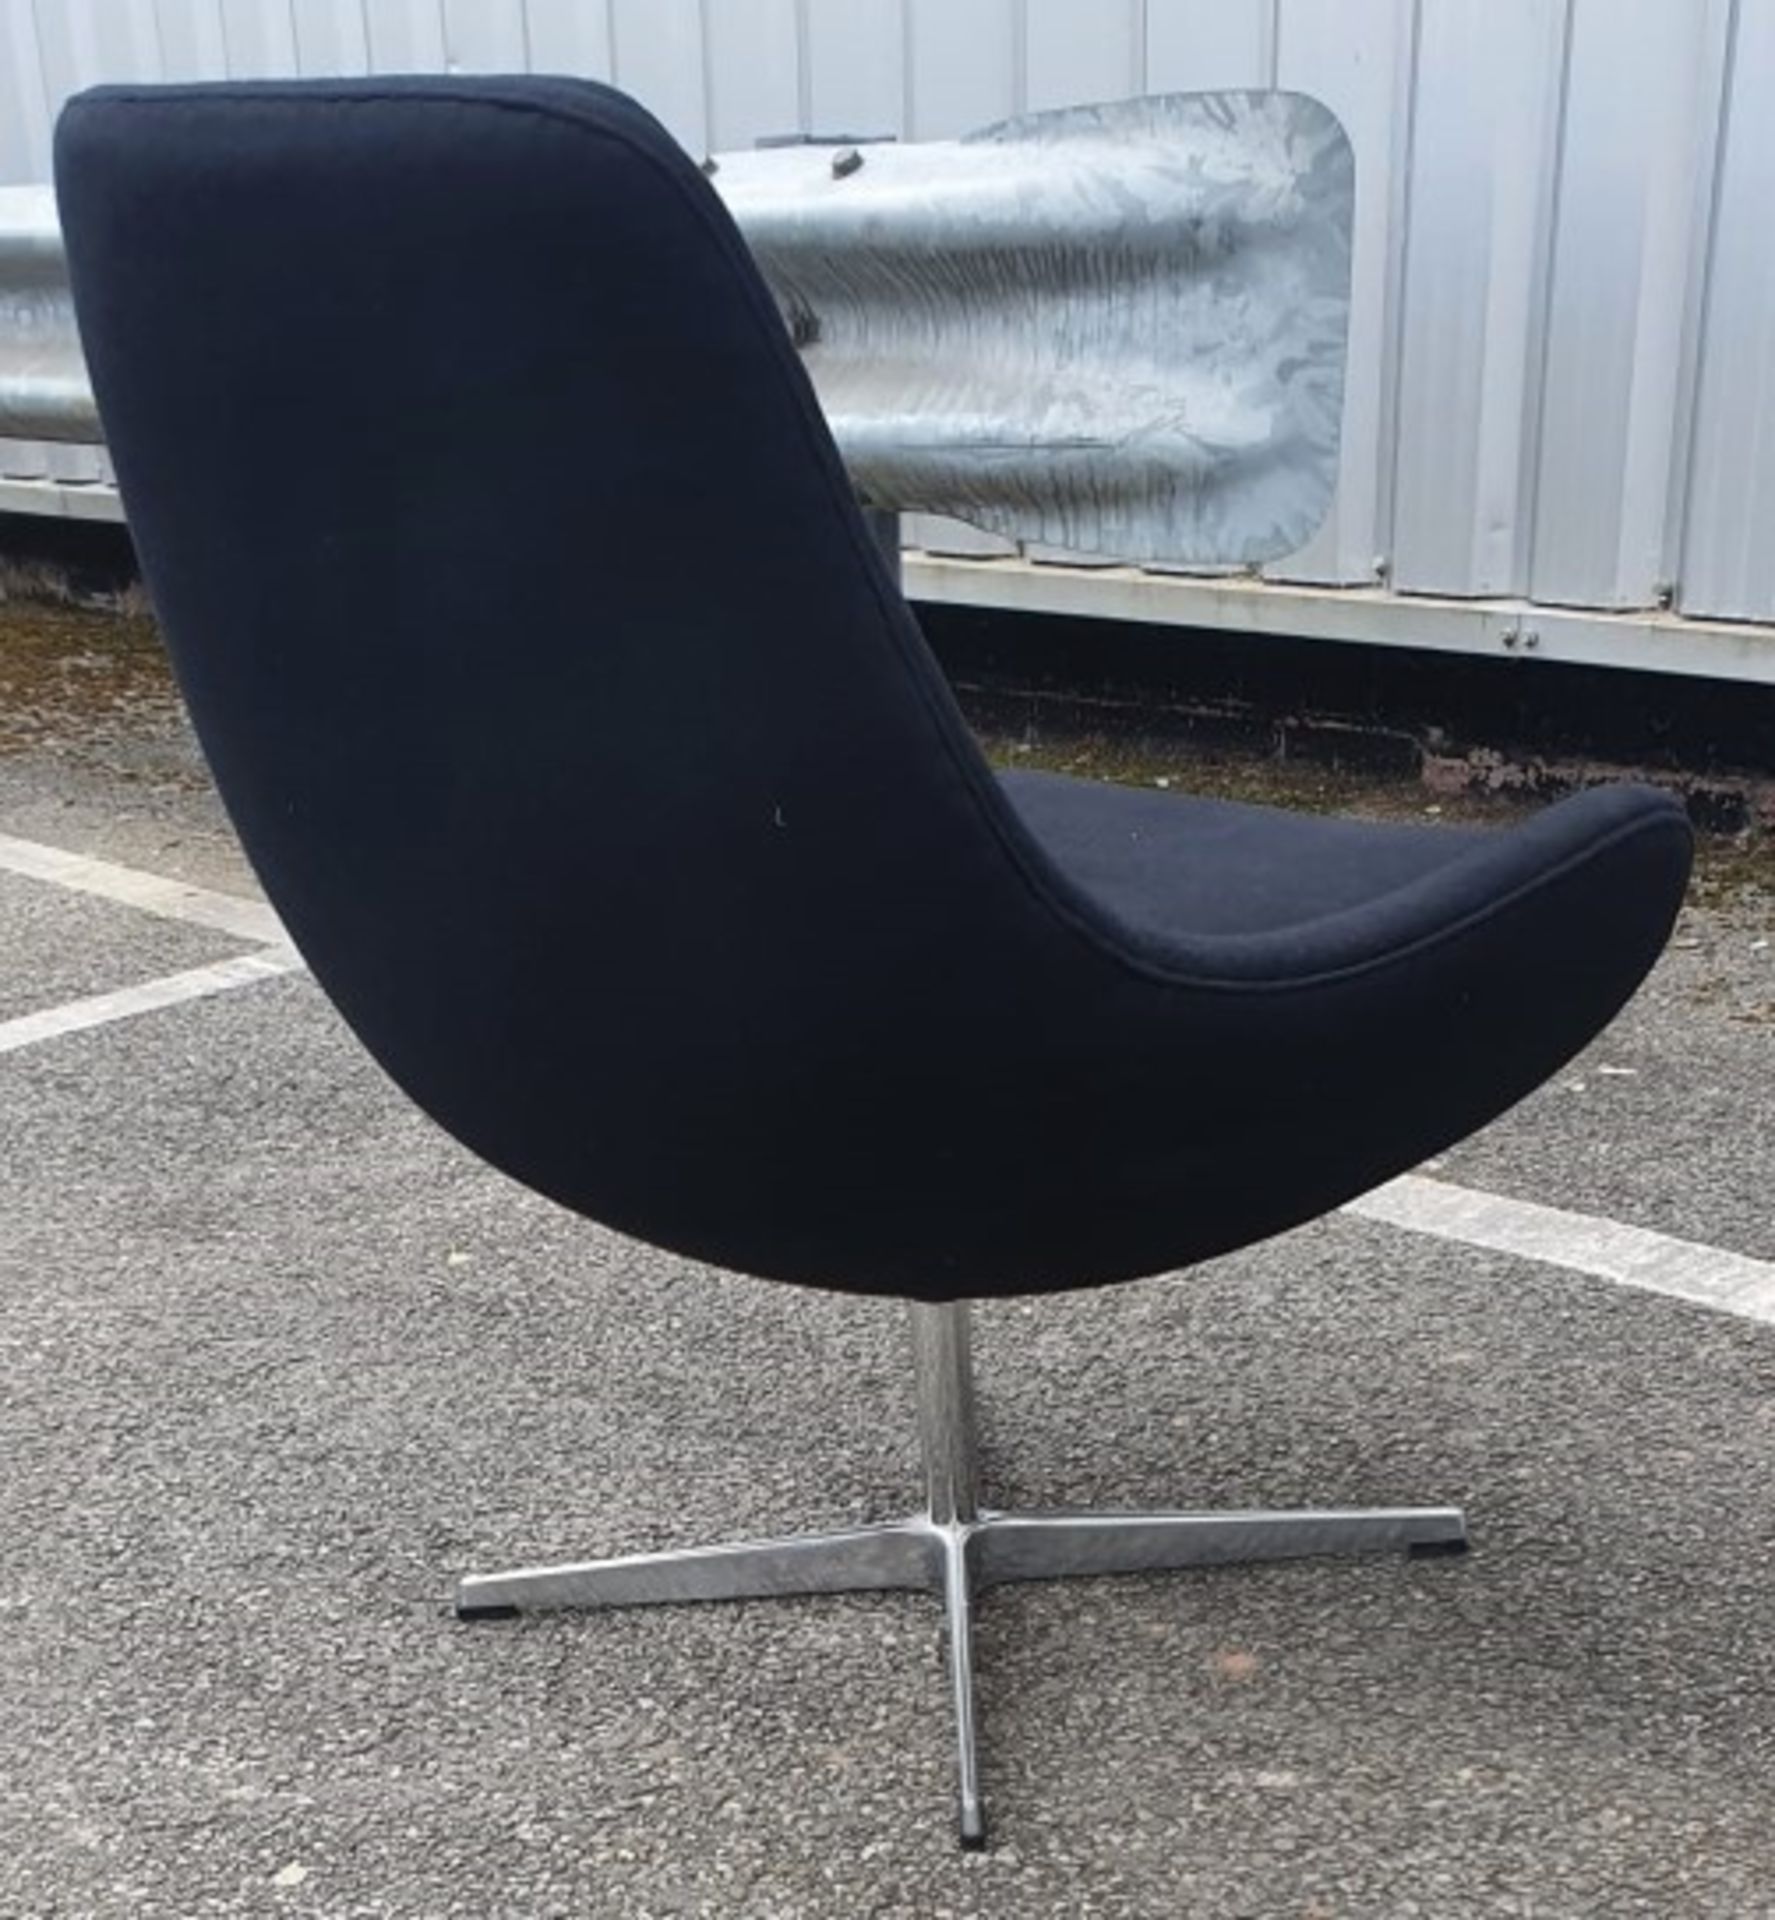 1 x STEIJER Super Easy Cashmere Upholstered Swivel Lounge Chair In Charcoal With Chromed Steel Base - Image 8 of 8